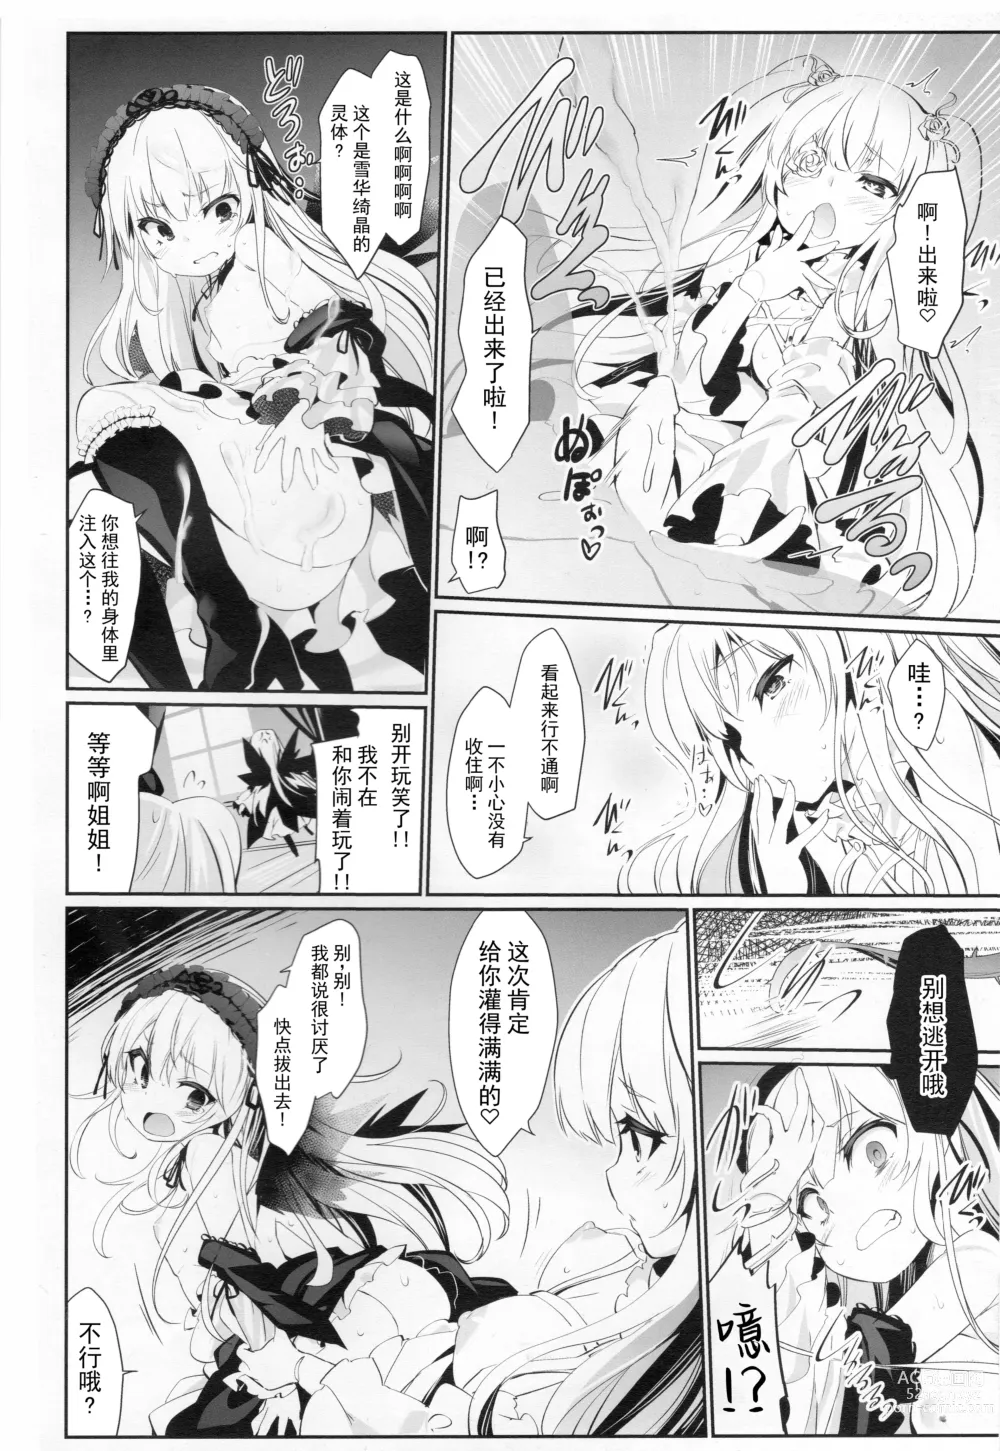 Page 7 of doujinshi Glamour Growth